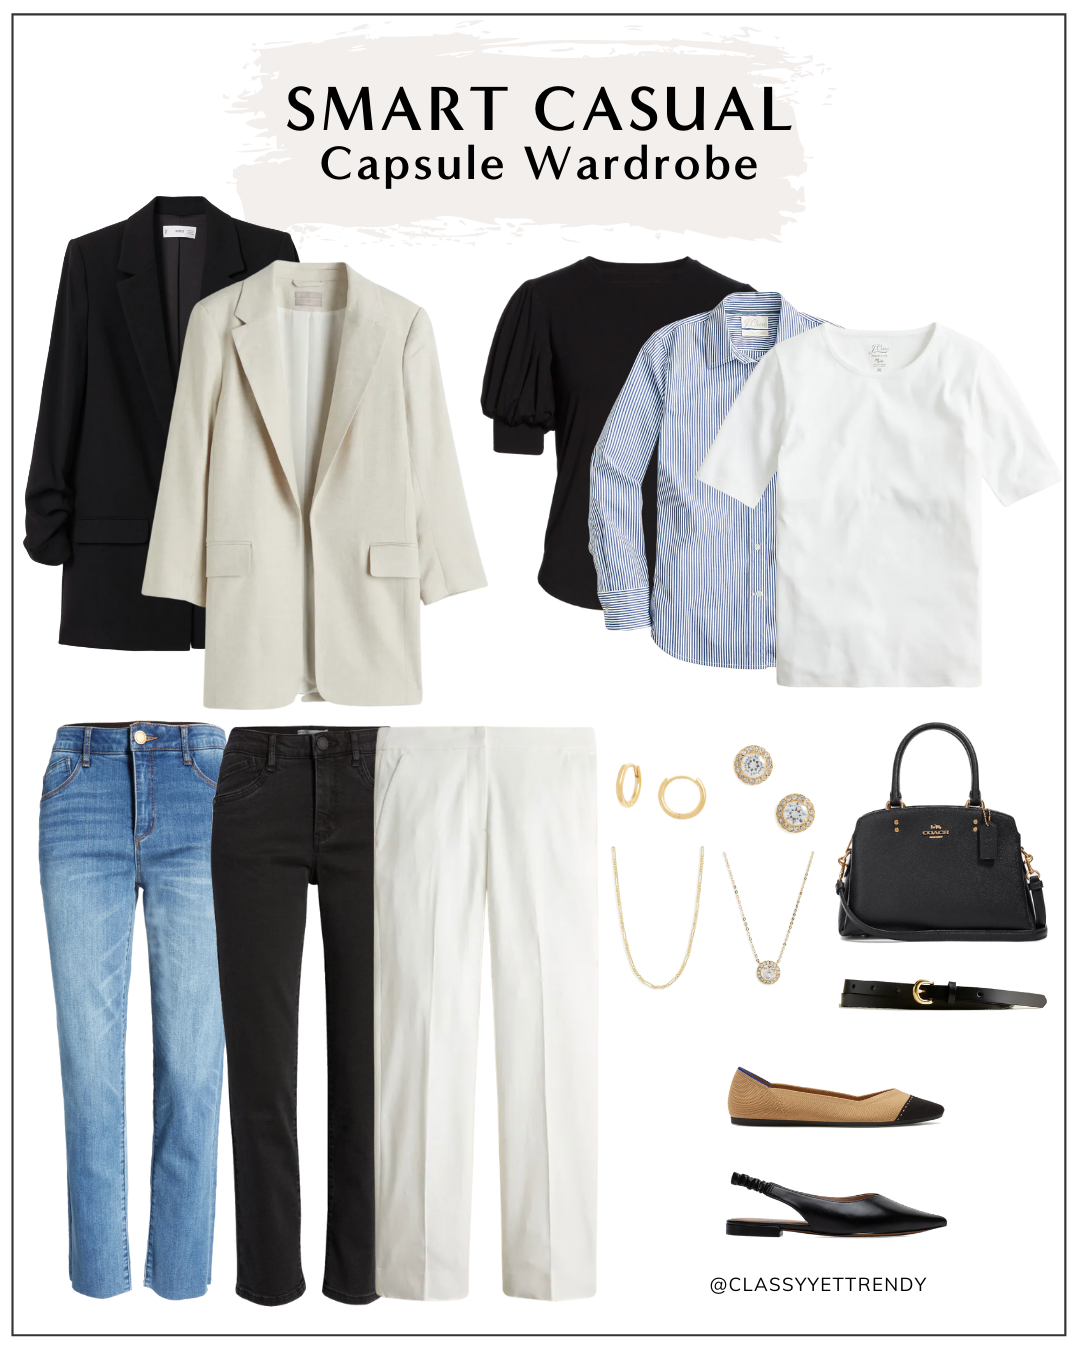 Women's Business Casual Outfits for Summer, Next Level Wardrobe